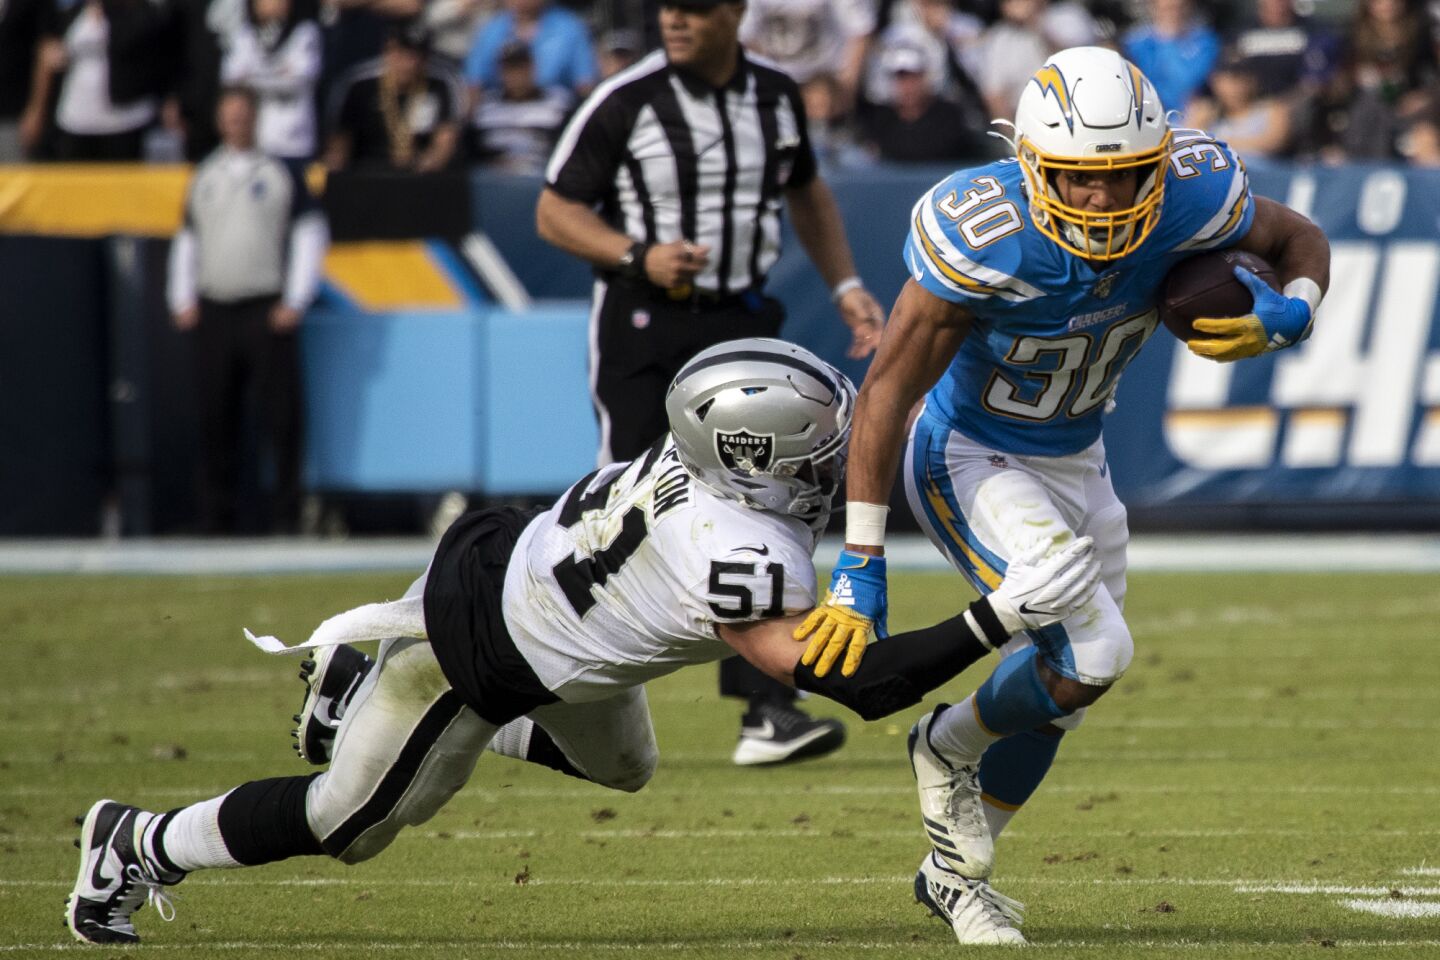 Chargers running back Austin Ekeler evades a tackle by Oakland Raiders inside linebacker Will Compton.